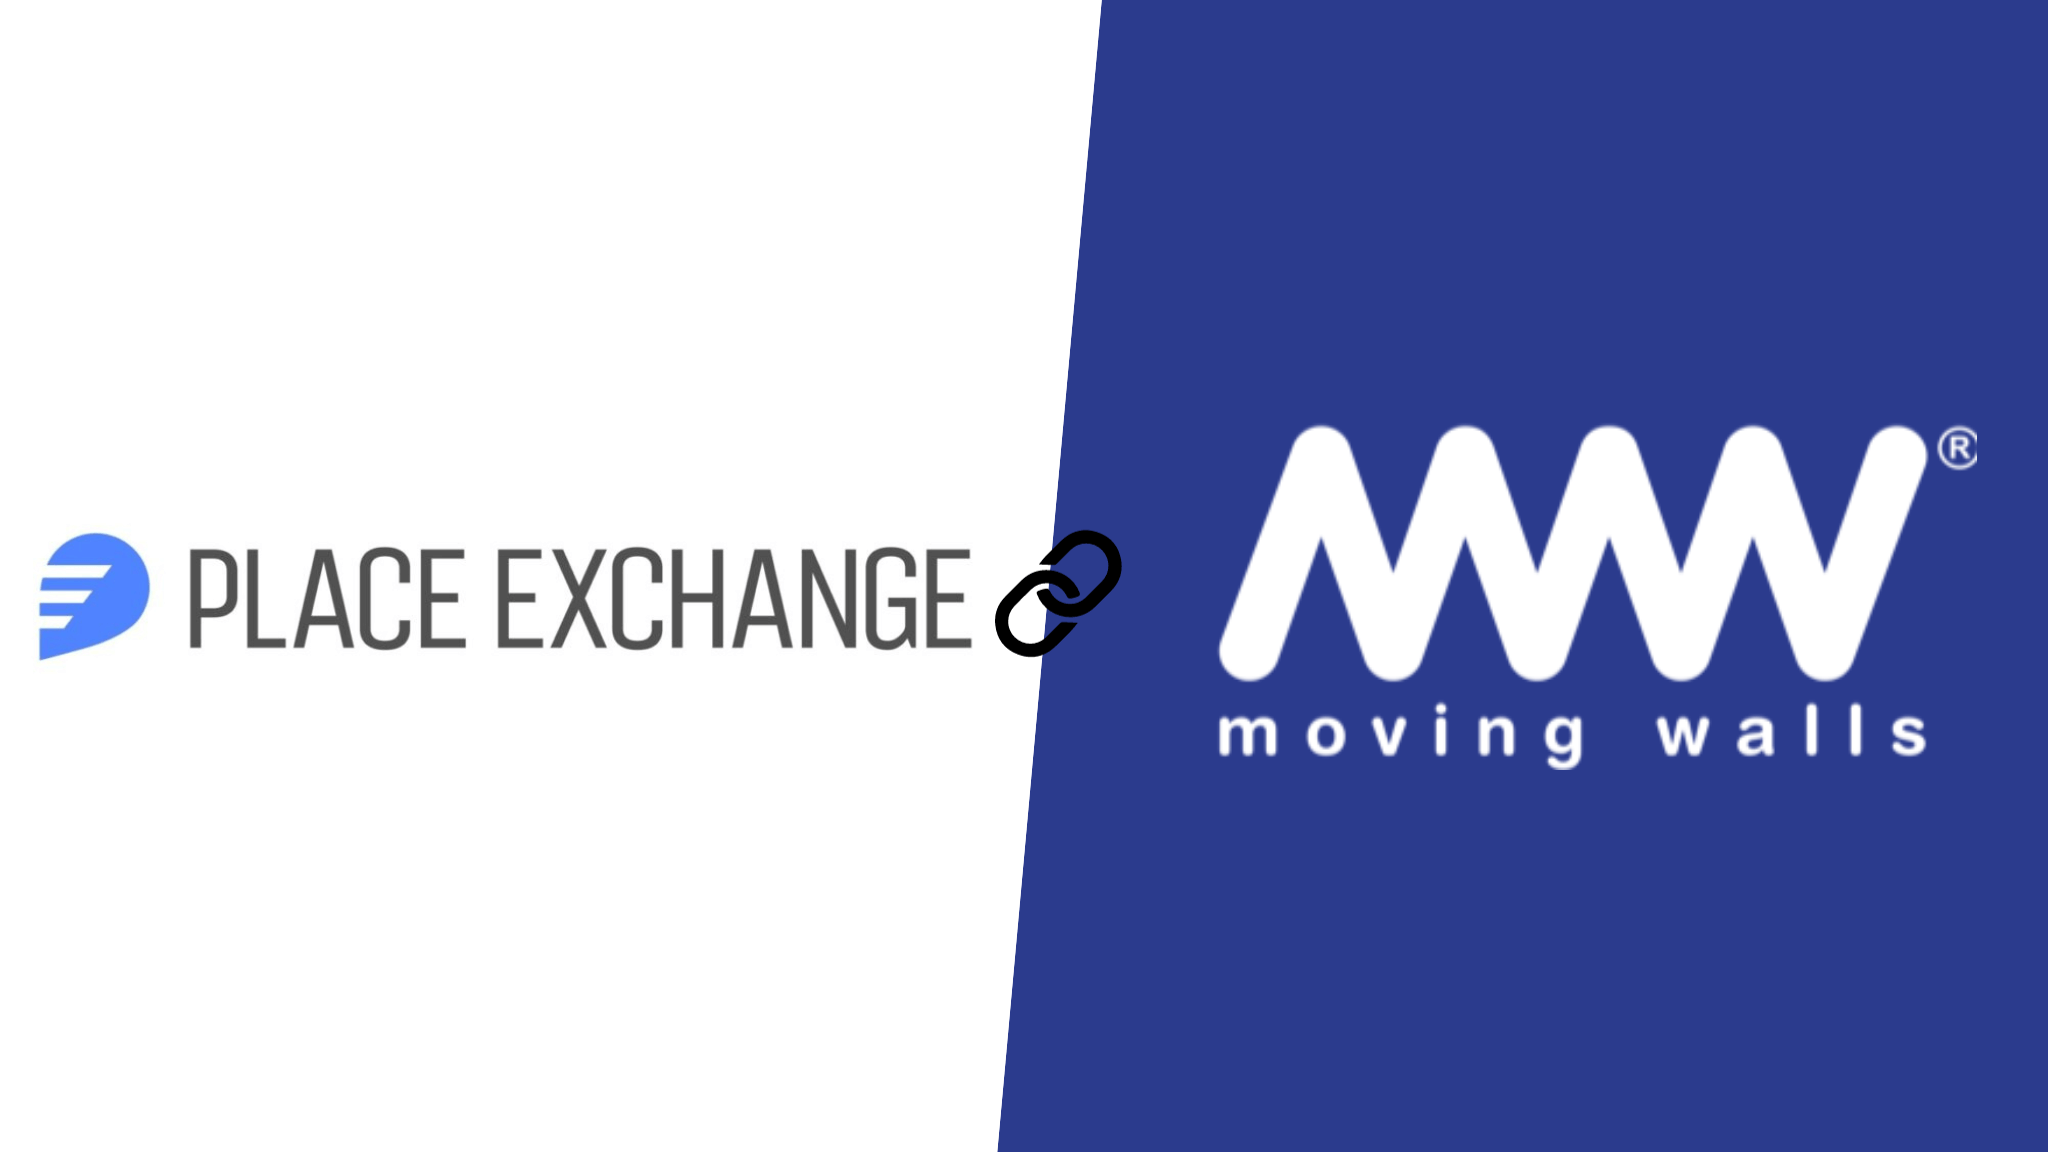 Moving Walls Partners with Place Exchange to En...